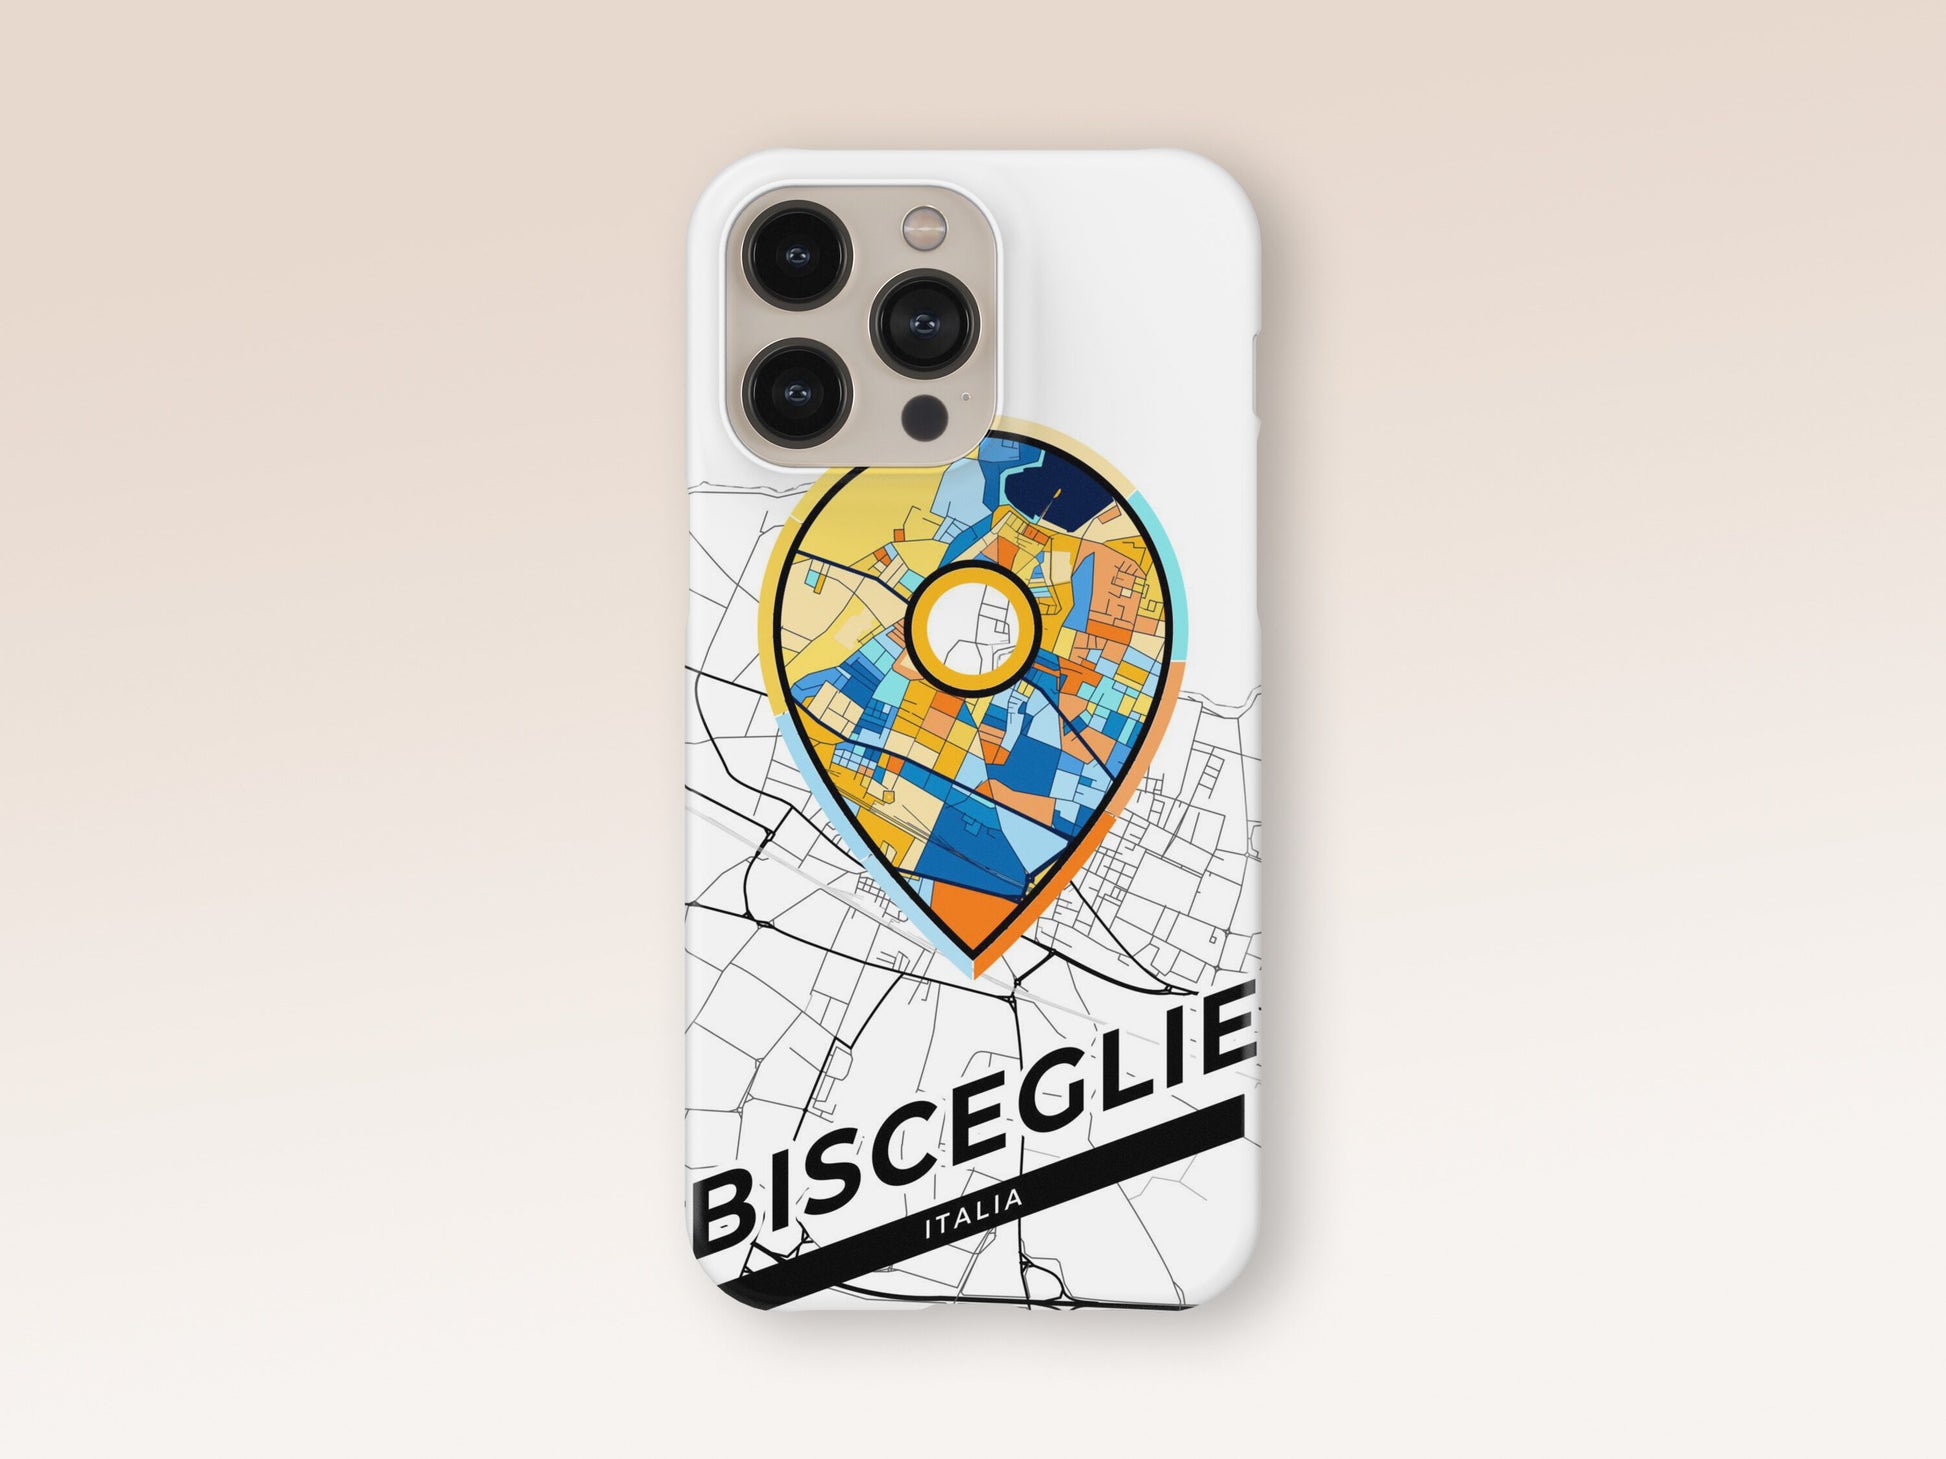 Bisceglie Italy slim phone case with colorful icon. Birthday, wedding or housewarming gift. Couple match cases. 1